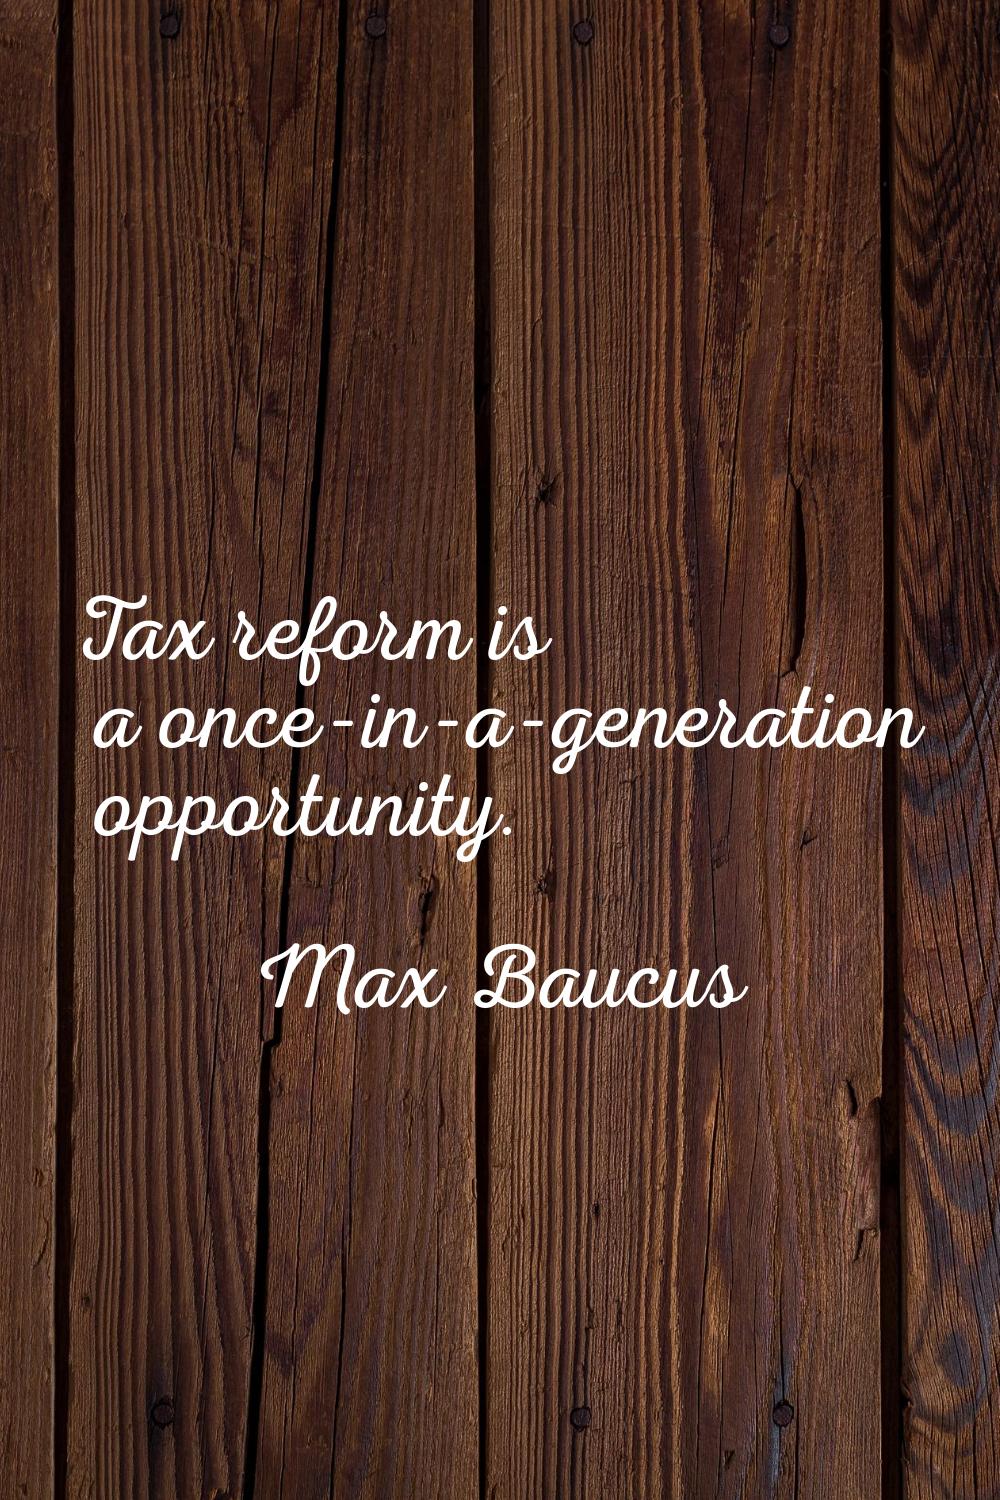 Tax reform is a once-in-a-generation opportunity.